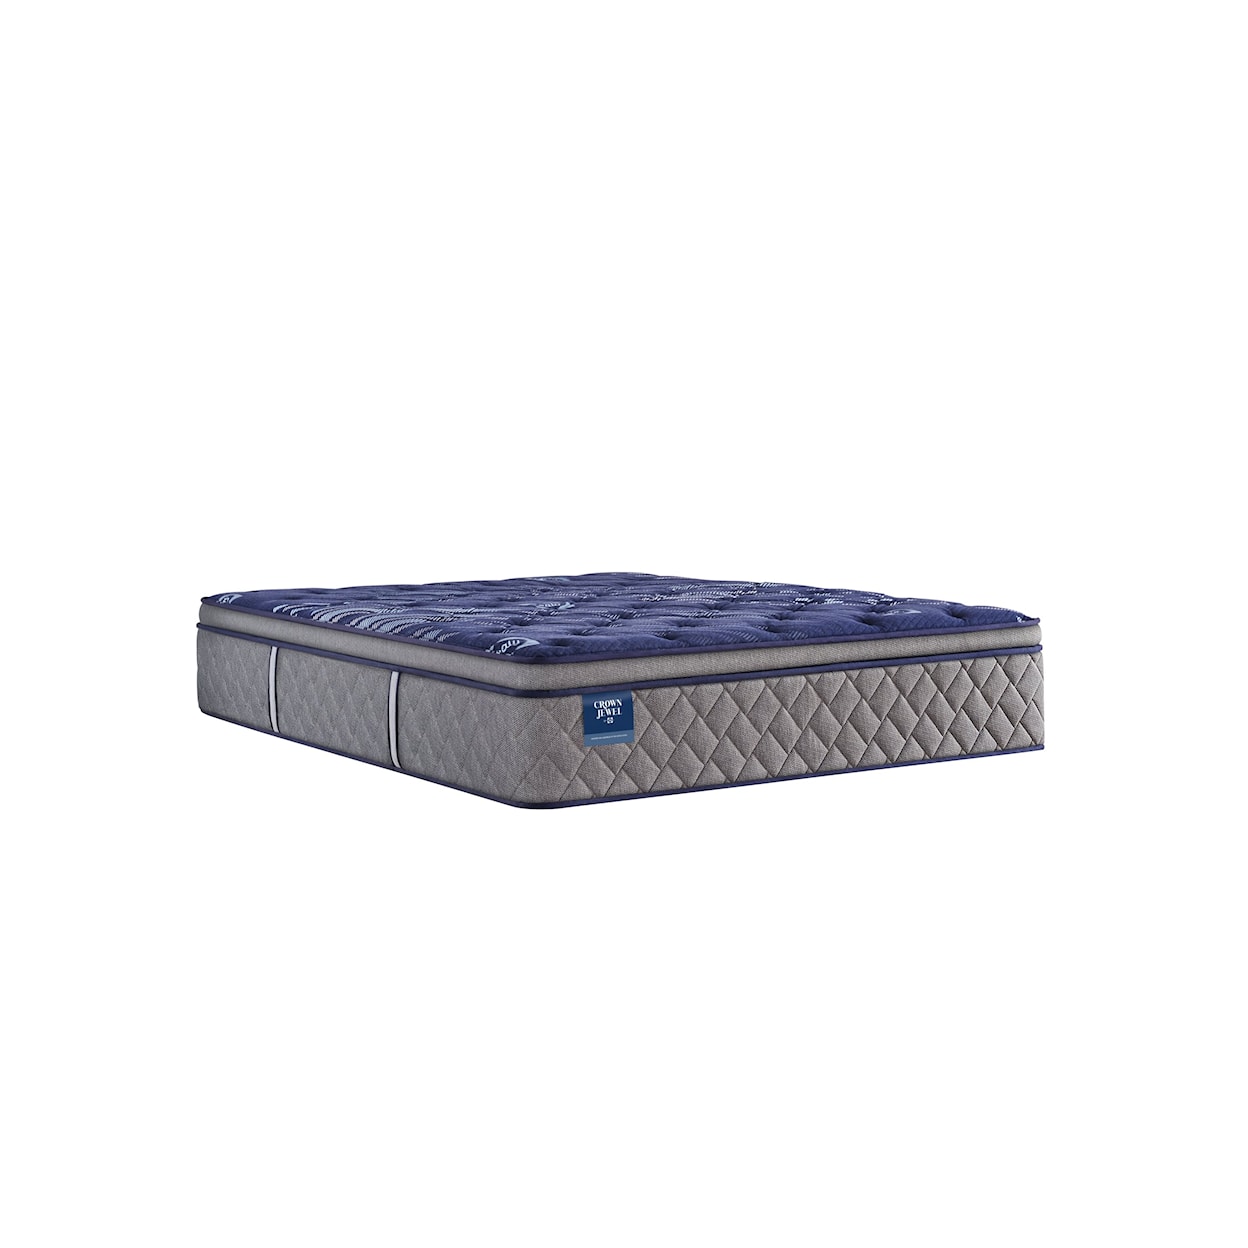 Sealy Crown Jewel S8 Eighth & Park  Soft EPT Double Mattress